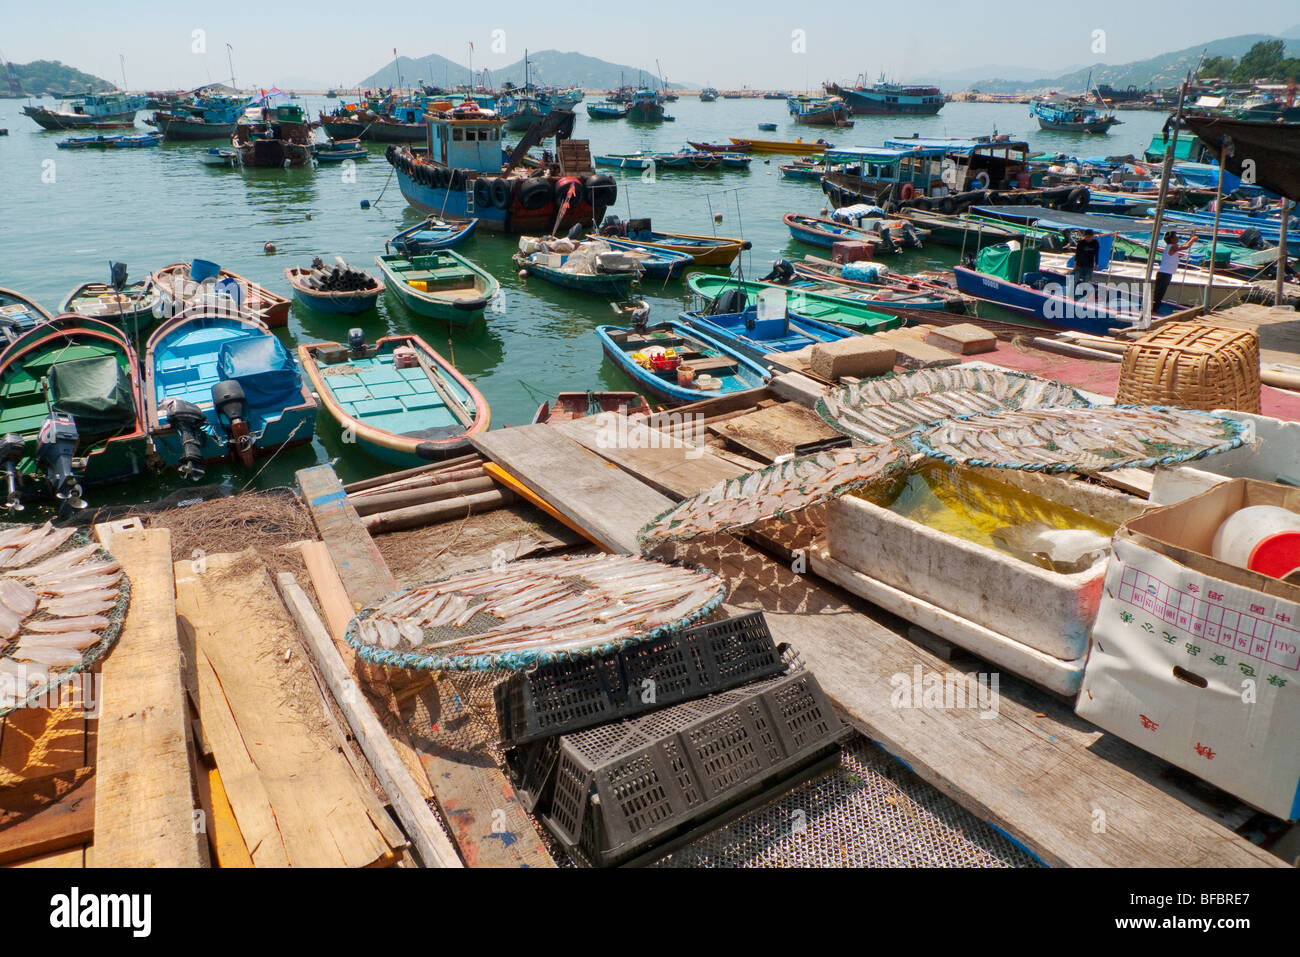 Fishing boats and drying filleted fish in the harbour at Cheung Chau, Hong Kong Stock Photo